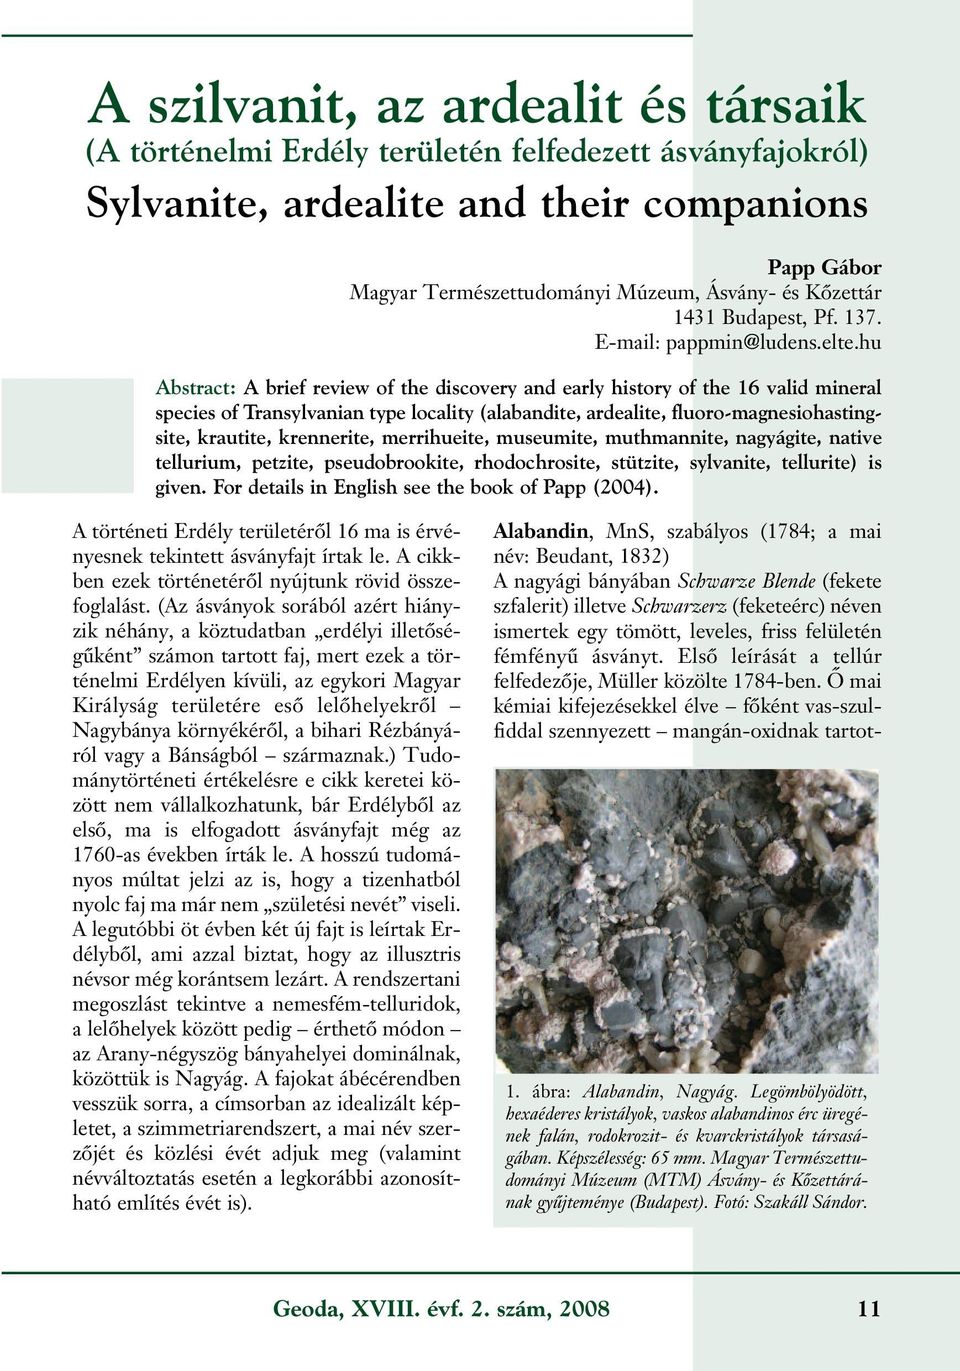 hu Abstract: A brief review of the discovery and early history of the 16 valid mineral species of Transylvanian type locality (alabandite, ardealite, fluoro-magnesiohastingsite, krautite, krennerite,